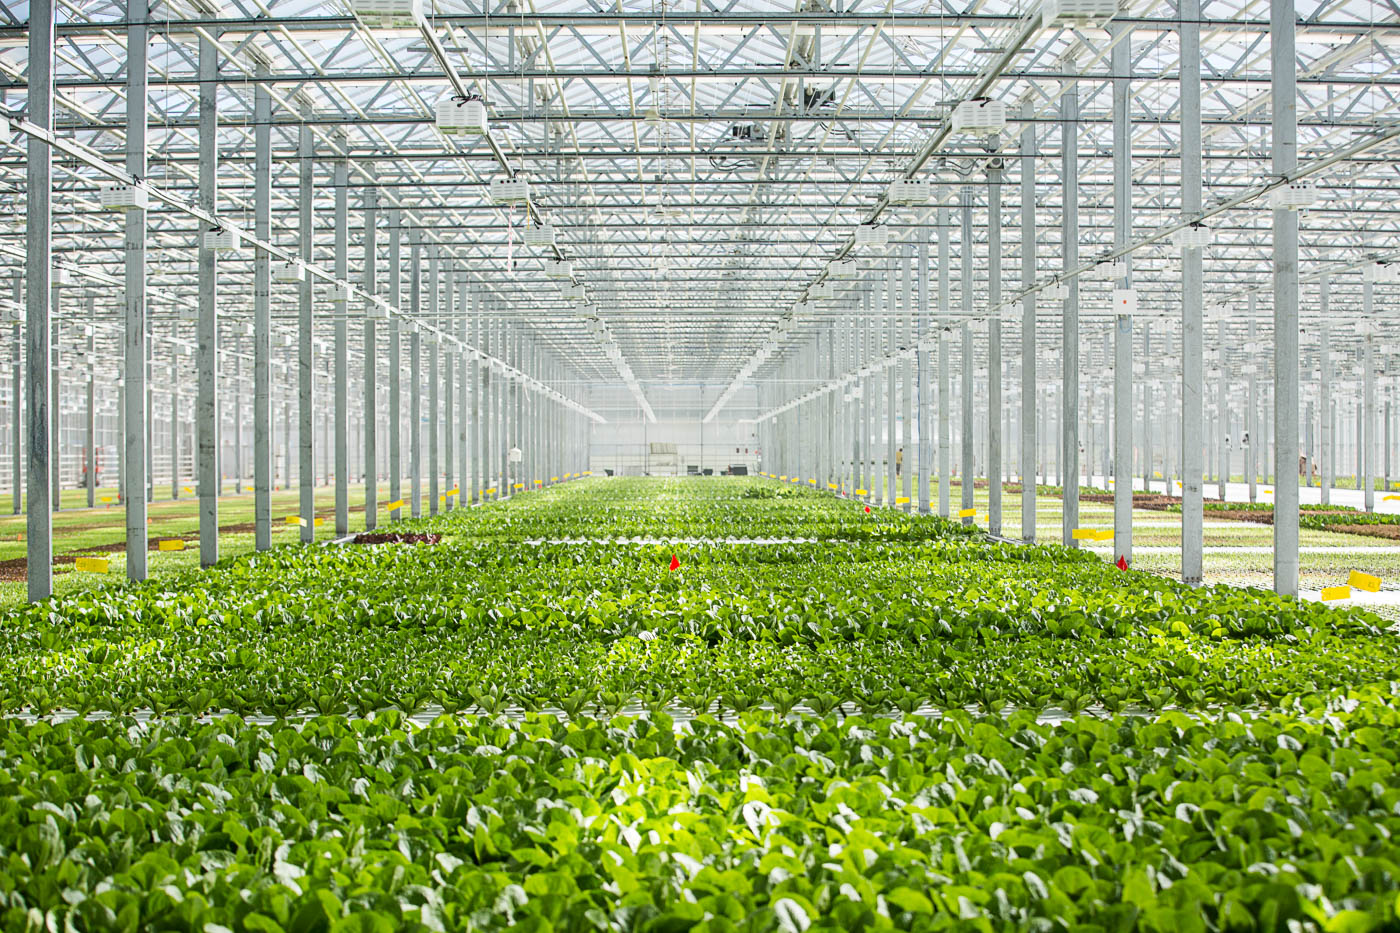 agriculture photographer Midwest - the inside of a large hydroponic greenhouse 